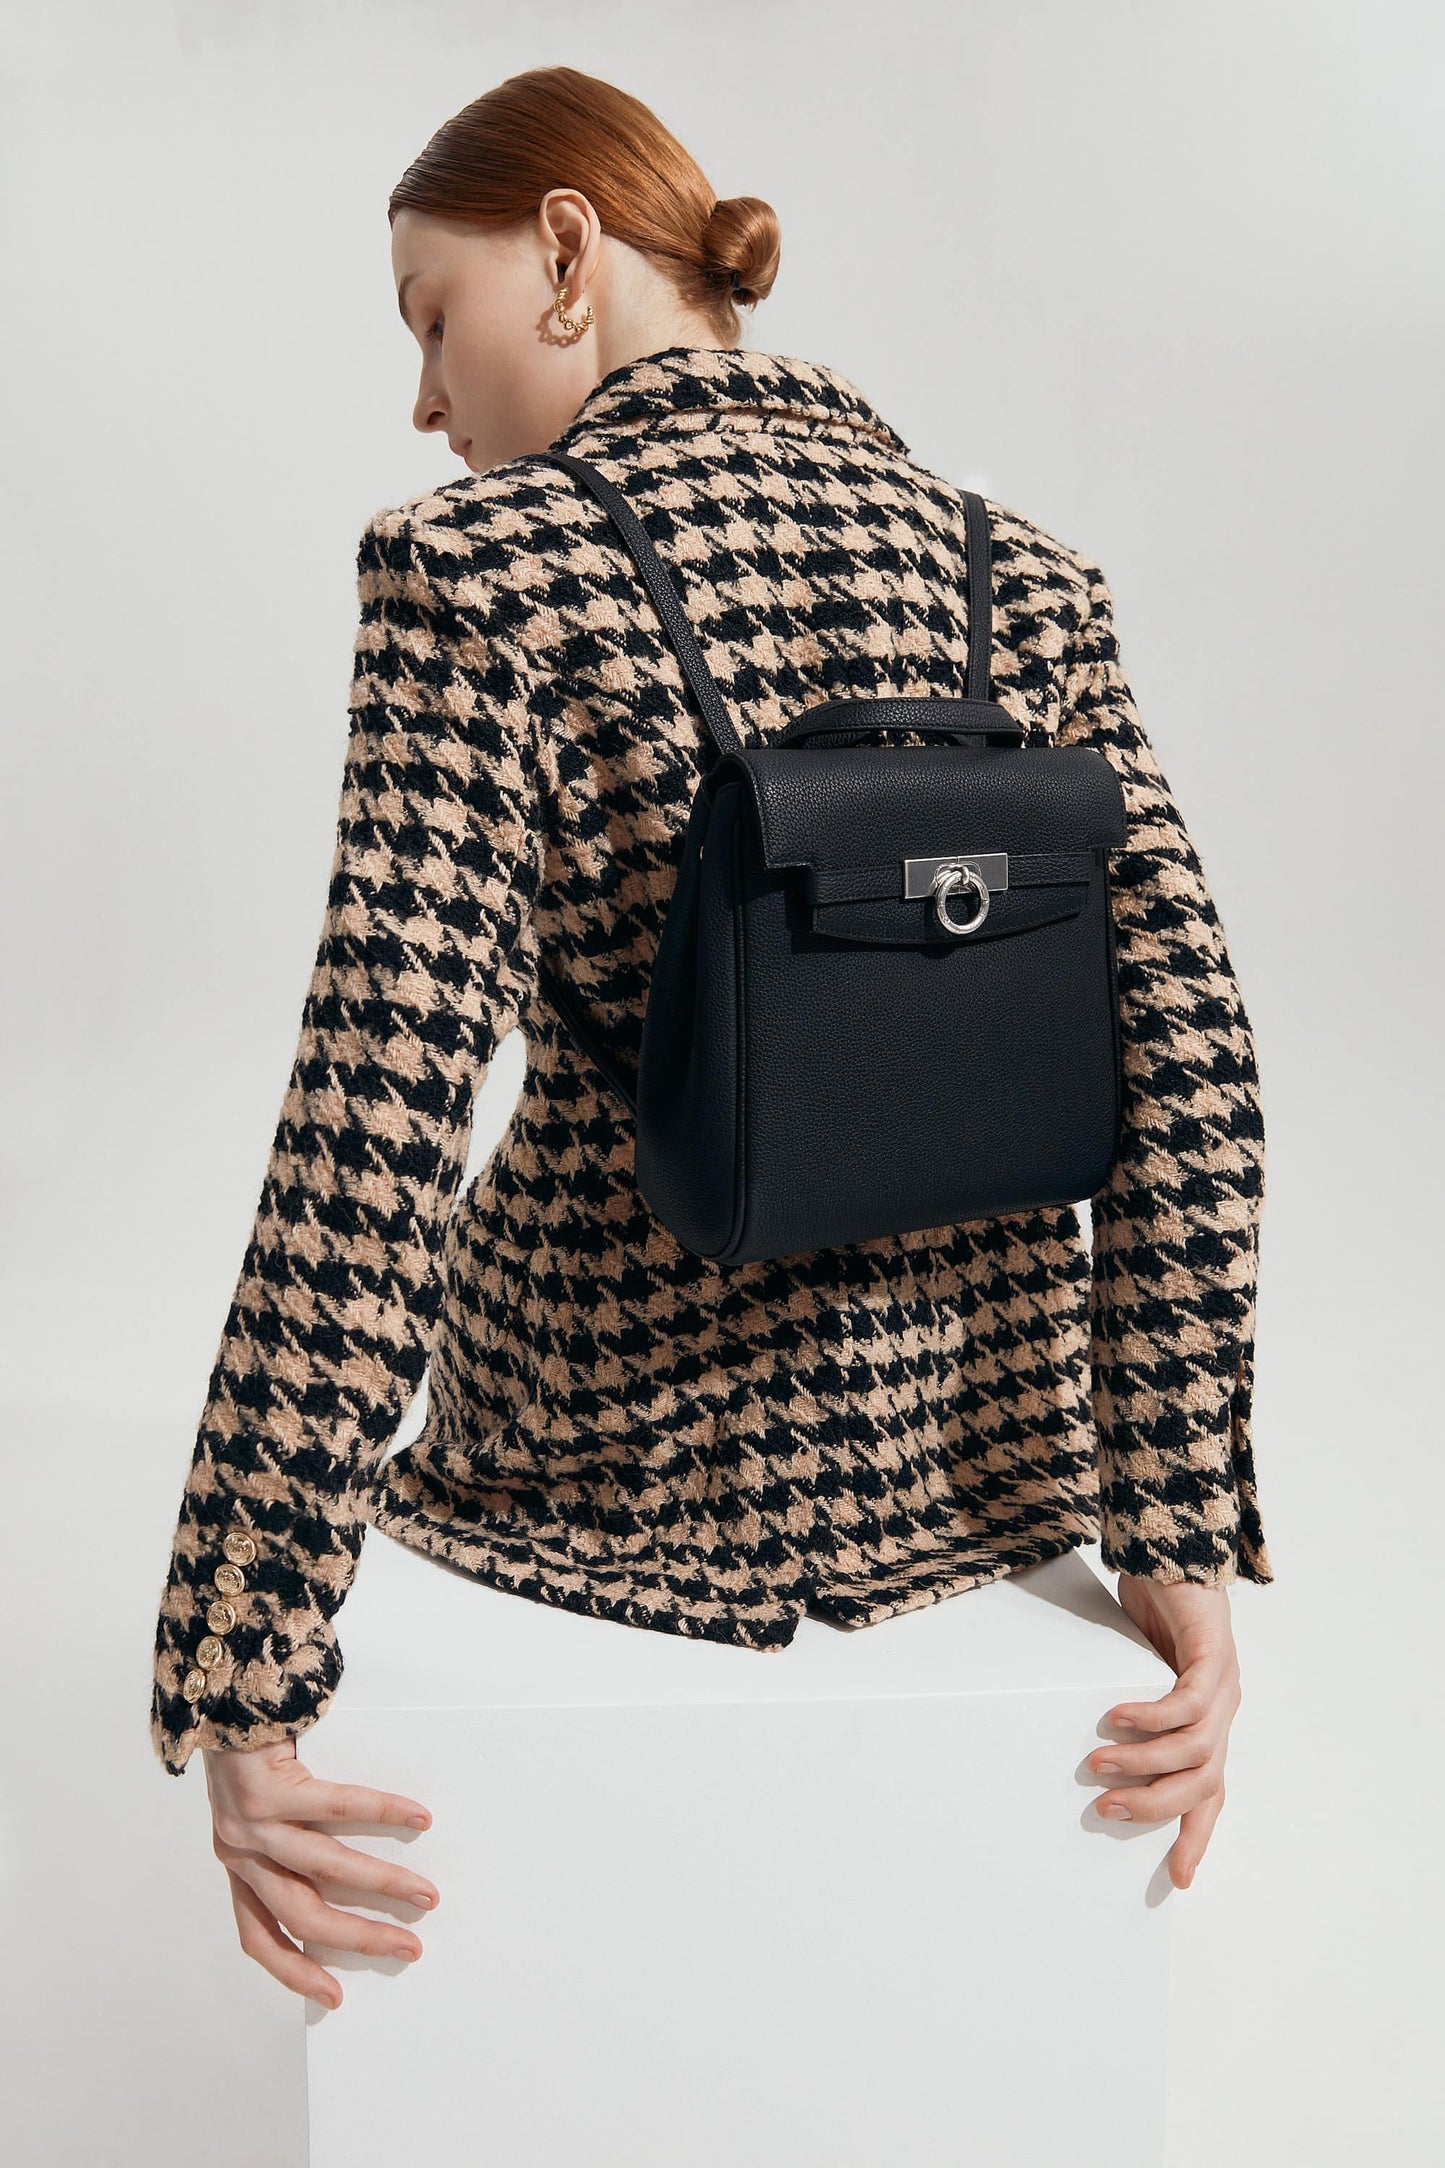 Unlocked Small Backpack in Black | Parisa Wang  | Featured